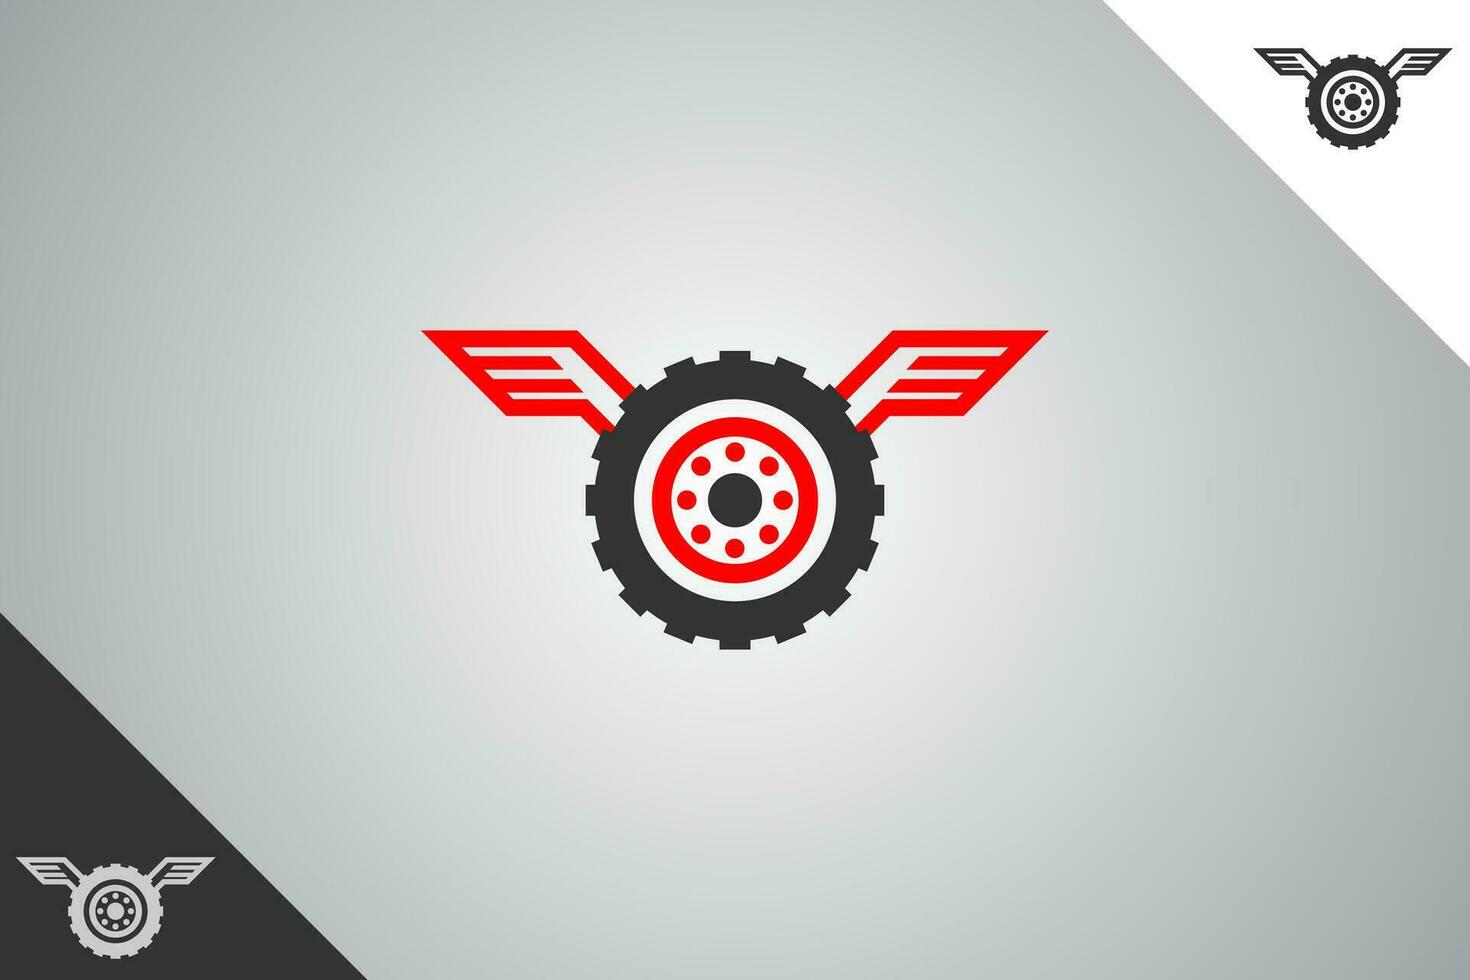 Wheel and rims logo. Minimal and modern logotype. Auto garage dealership brand identity design elements. Perfect logo for business related to automotive industry. Isolated background. Vector eps 10.